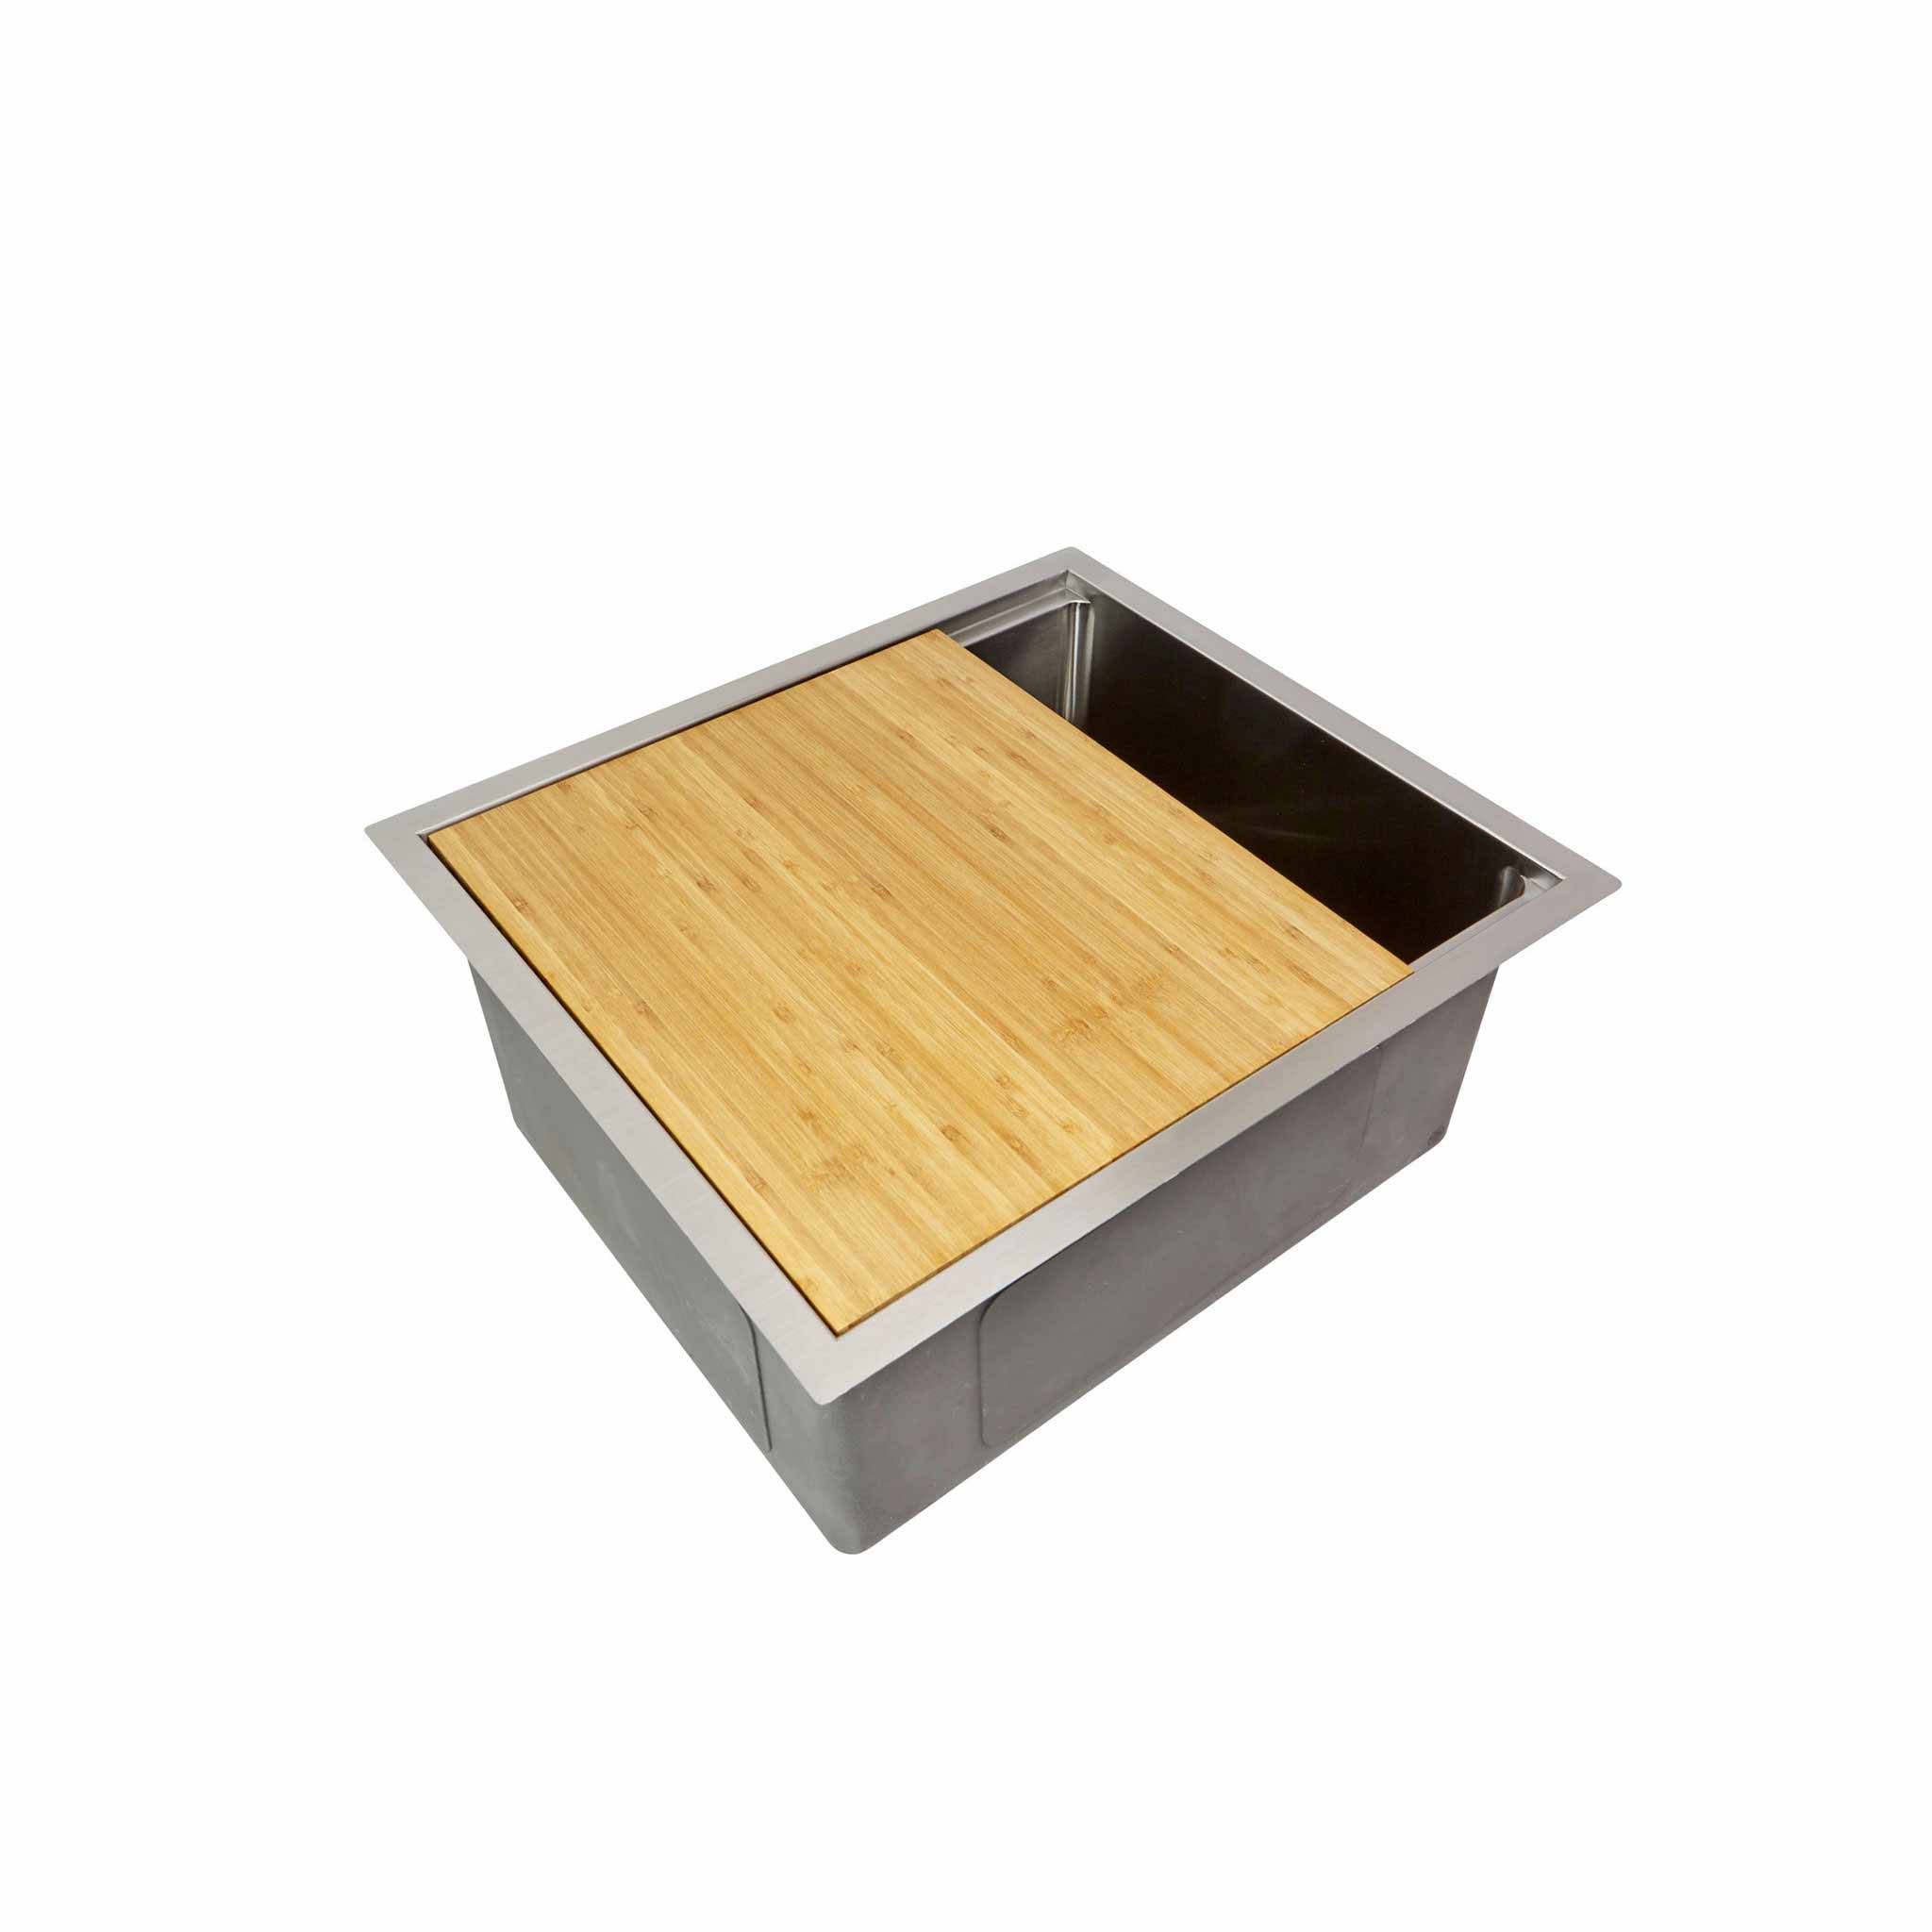 22" stainless steel workstation prep sink with offset seamless drain, and cutting board accessory for the built in ledge